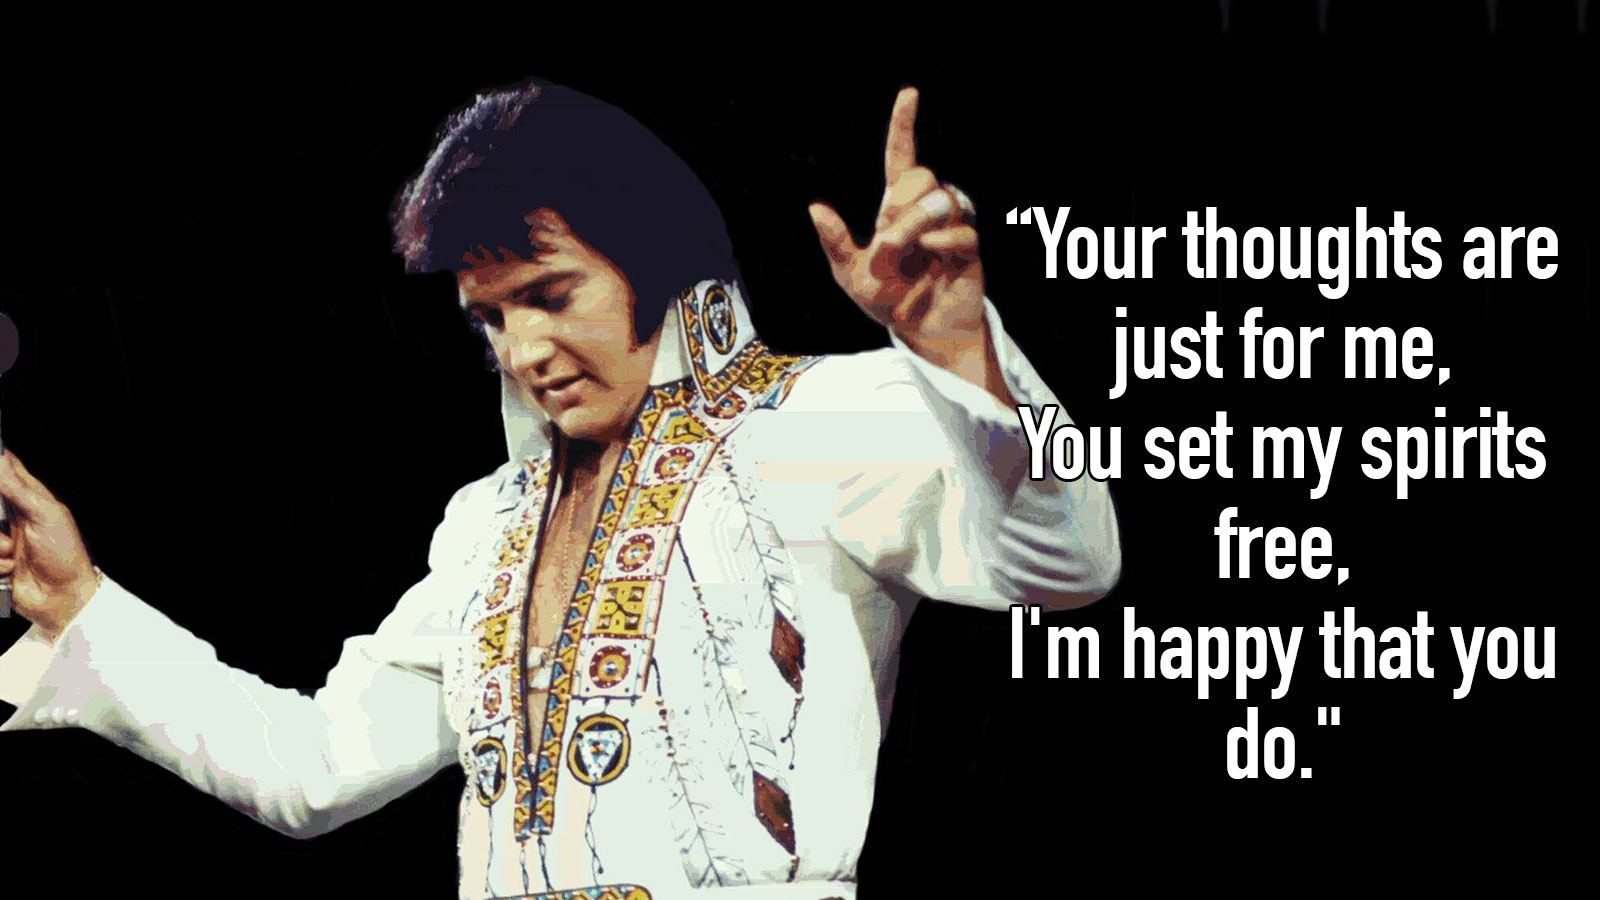 Can You Guess Which Elvis Presley Song This Lyric Is From? 141